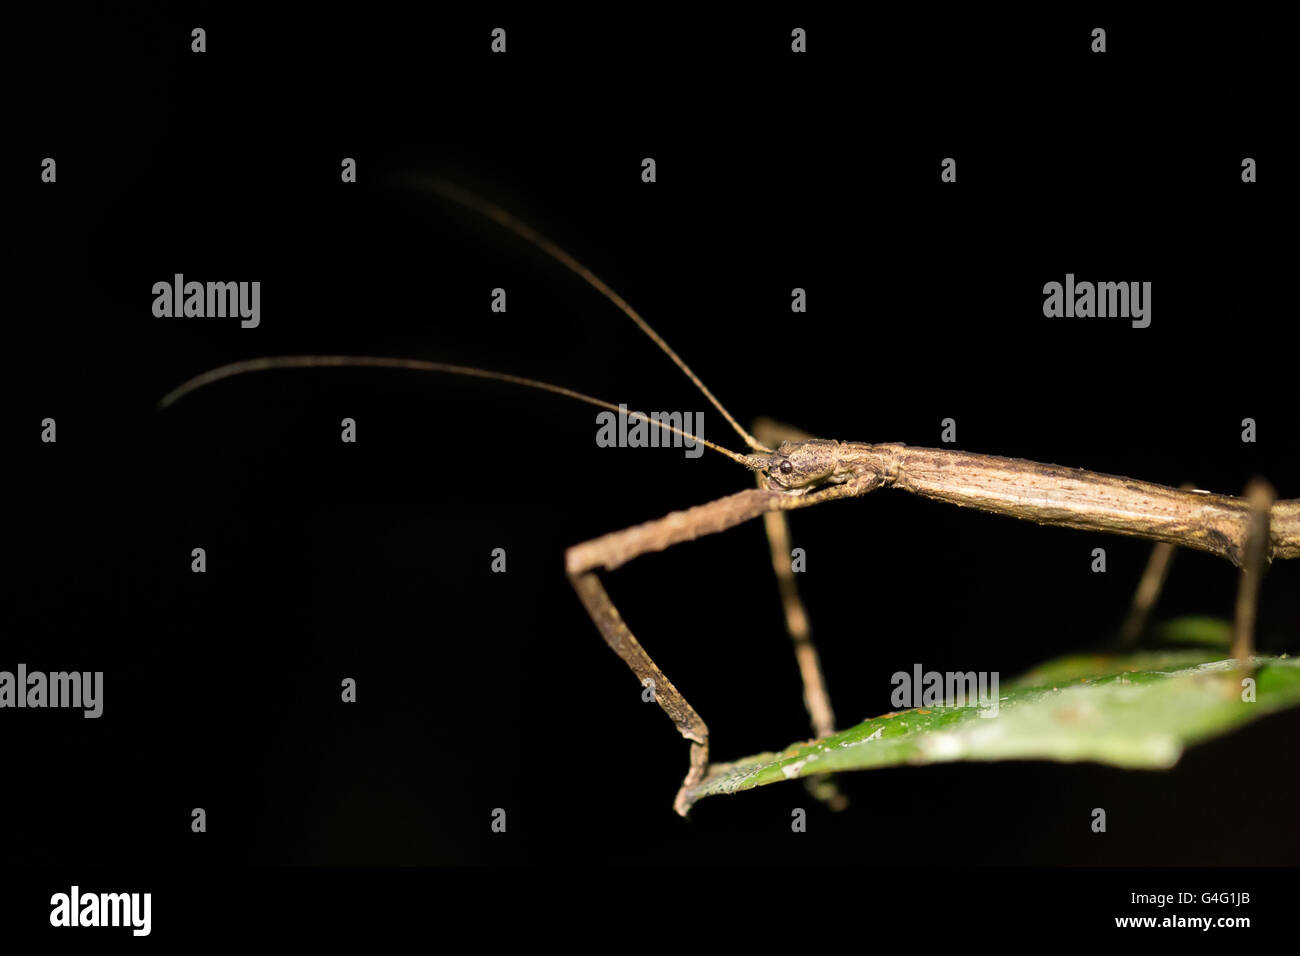 Stick insect in the jungle at night. Bako National Park in Sarawak, Malaysian Borneo. Stock Photo